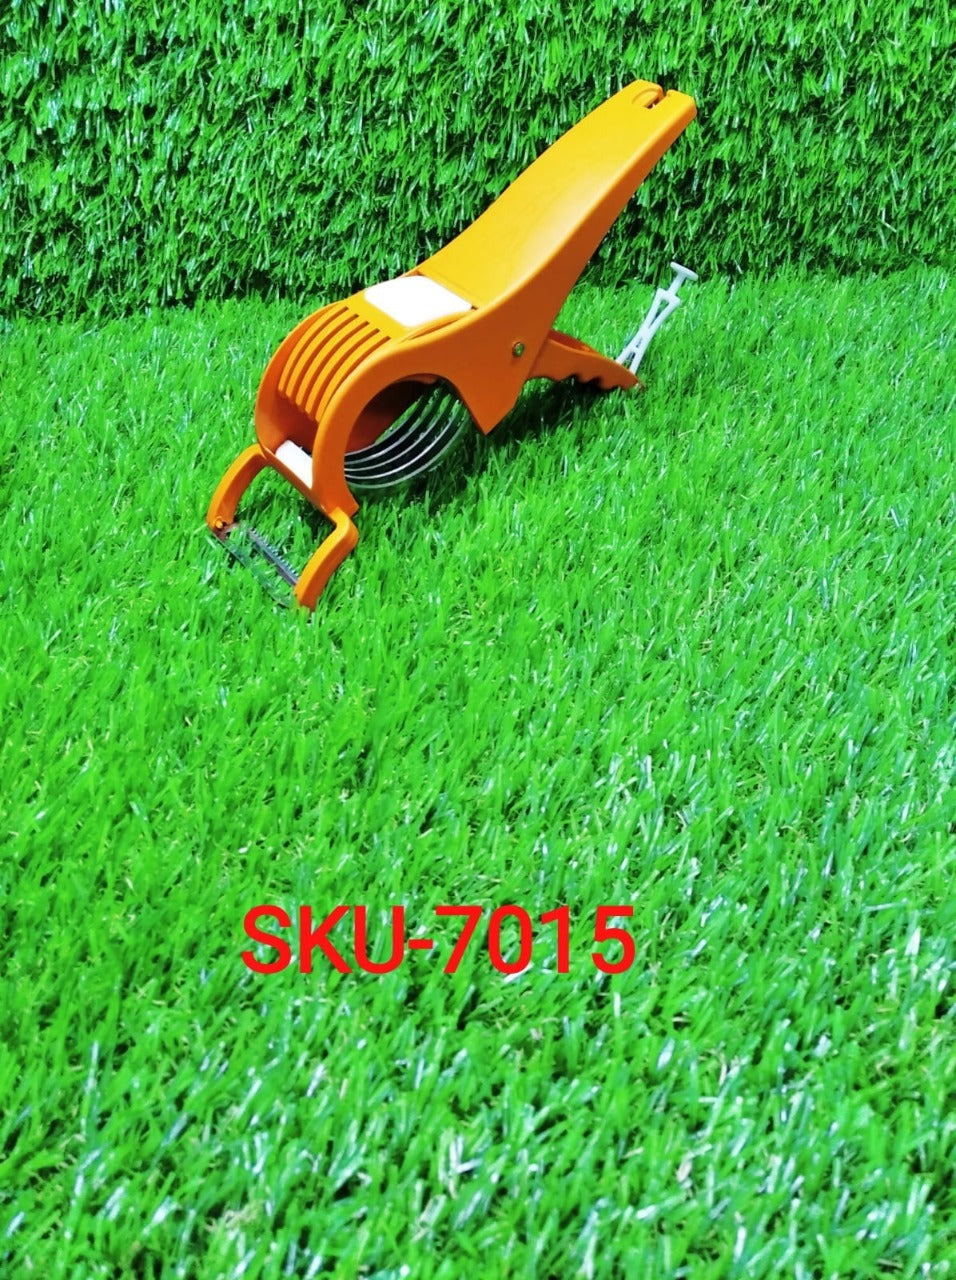 7015 Vegetable Cutter used in all kinds of household and kitchen purposes for cutting vegetables etc.